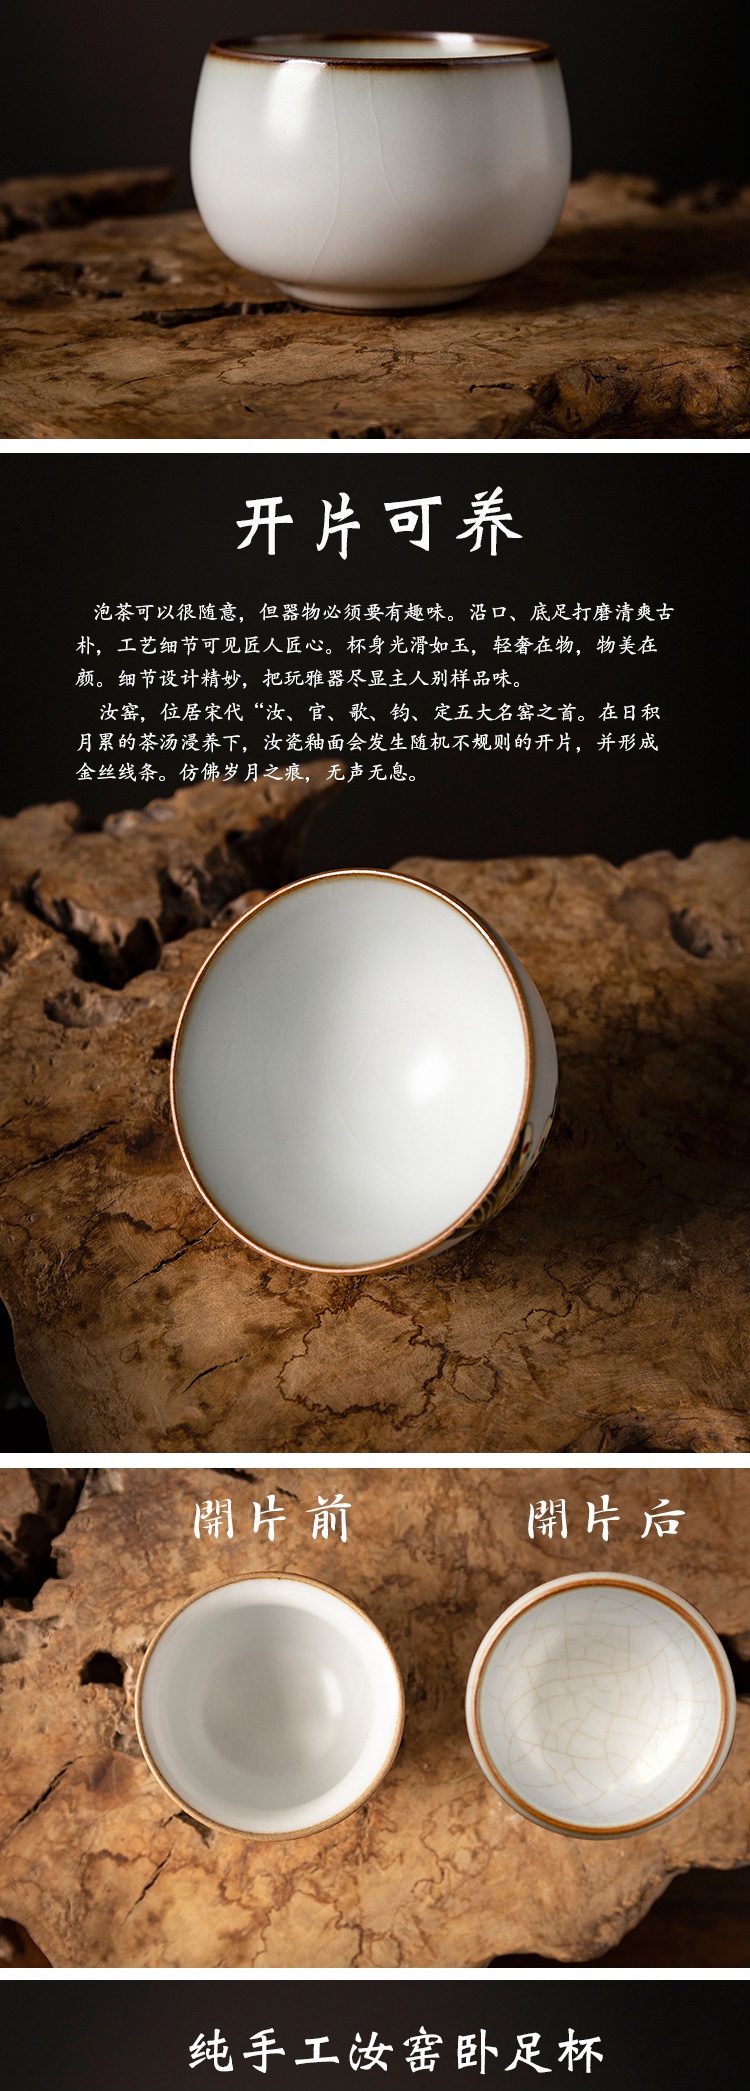 The Poly real JingChun manual jingdezhen which your up on high - end ceramic kung fu masters cup your porcelain tea cups